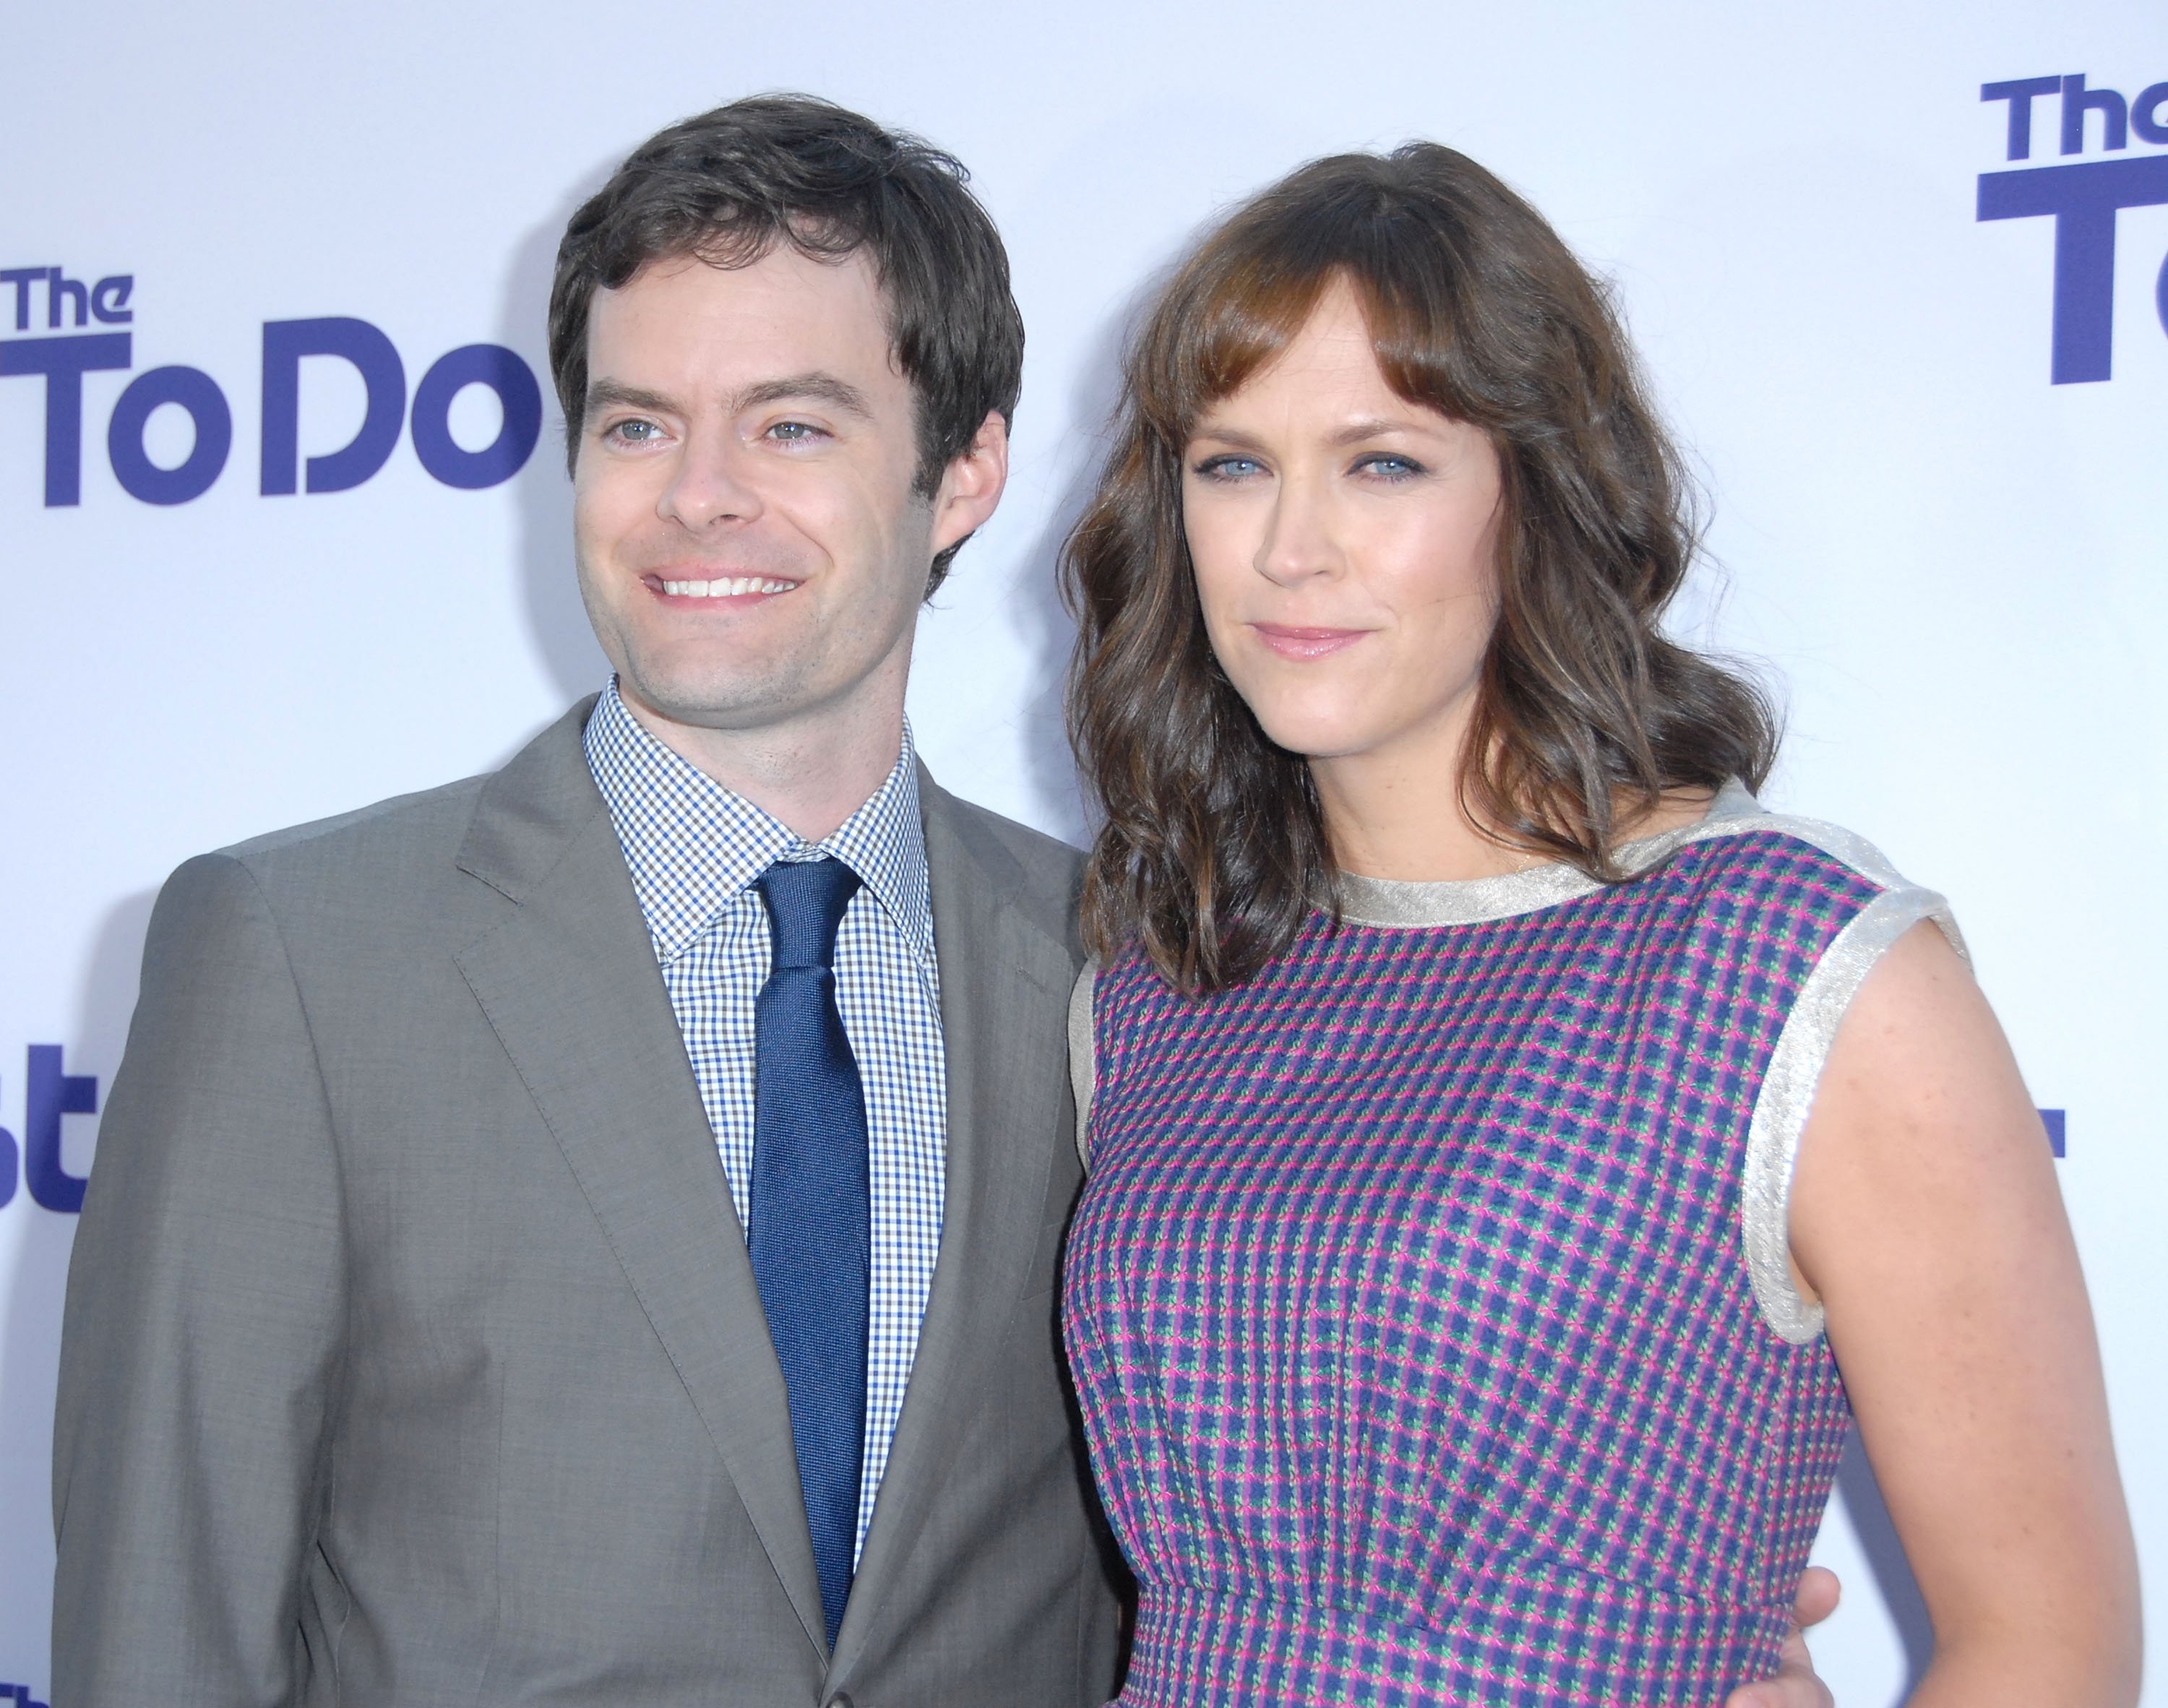 Actor Bill Hader and ex-wife director/writer Maggie Carey arrive at the Los Angeles Premiere 'The To Do List' at the Regency Bruin Theatre on July 23, 2013 in Westwood, California. | Source: Getty Images